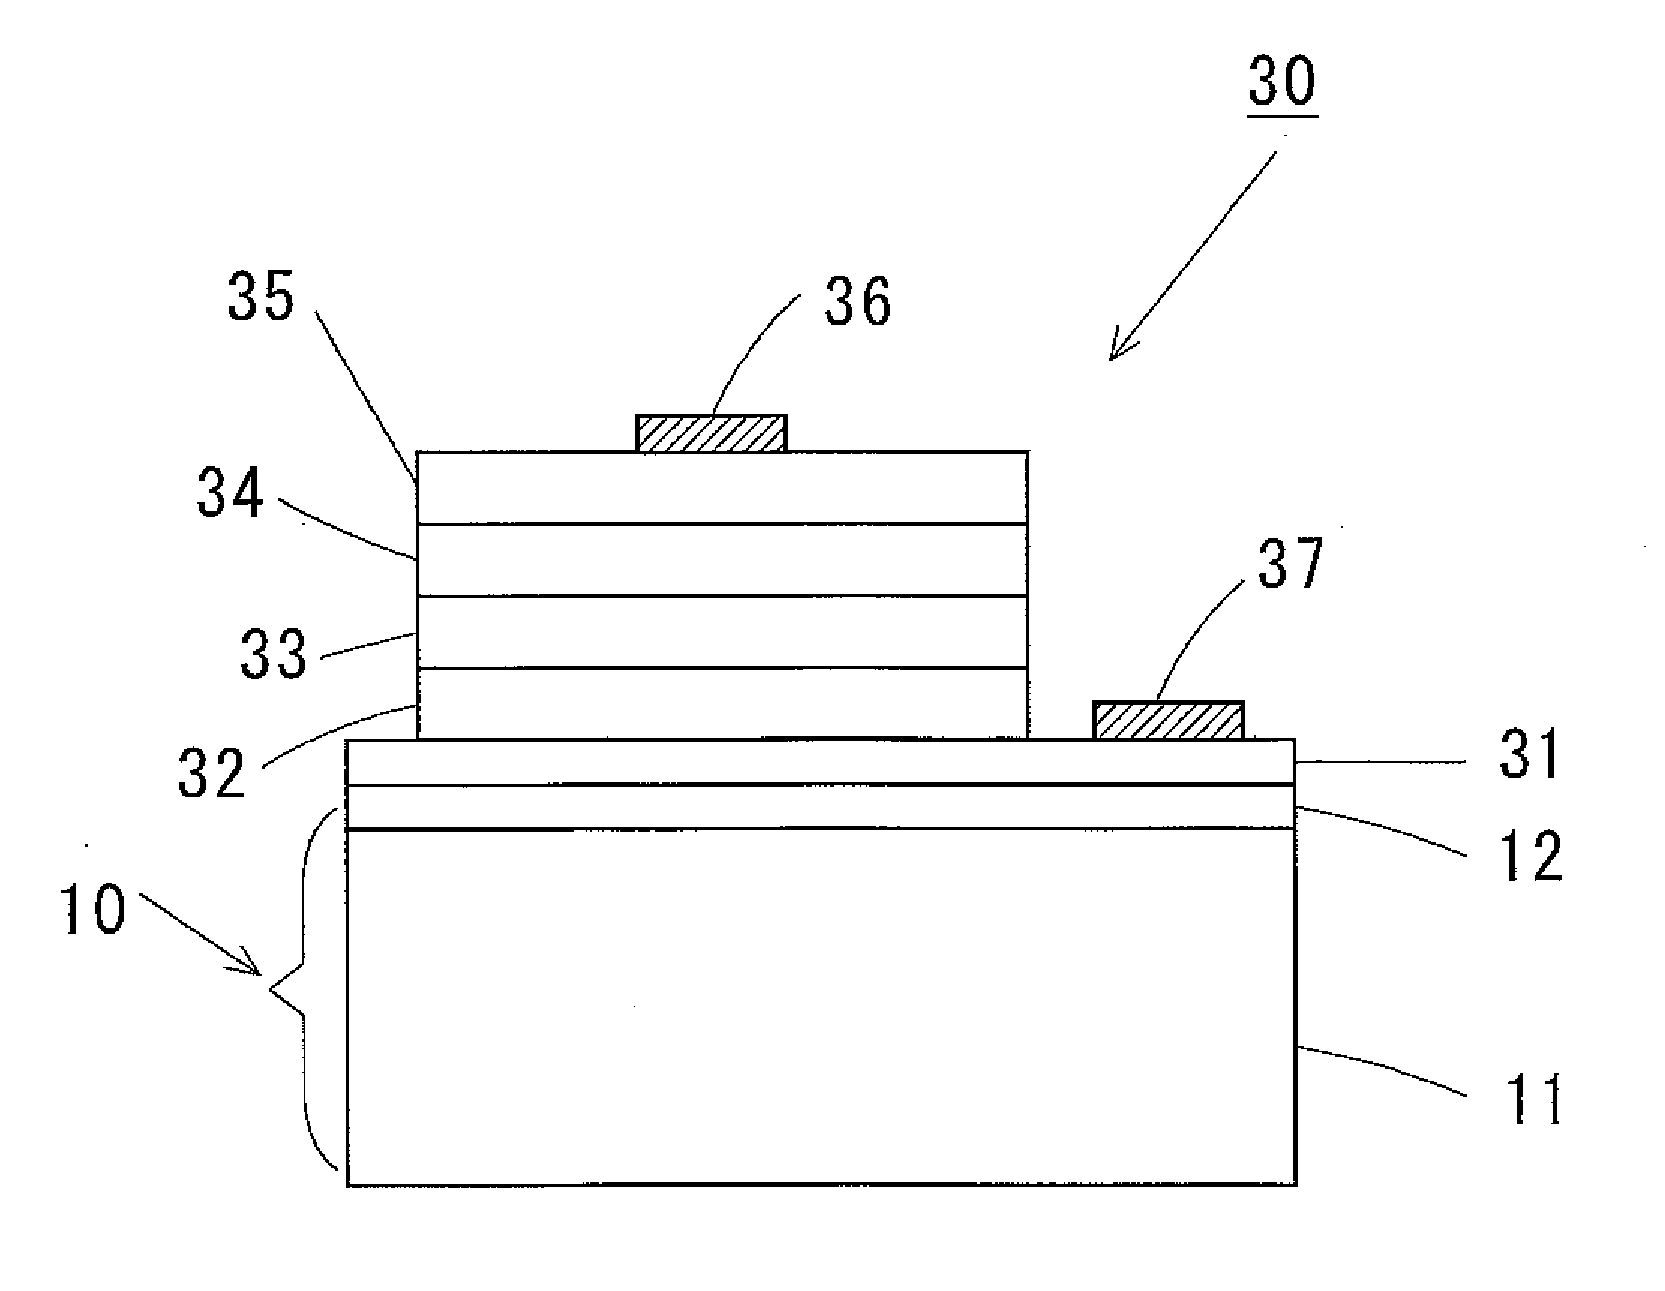 Substrate for film growth of group iii nitrides, method of manufacturing the same, and semiconductor device using the same